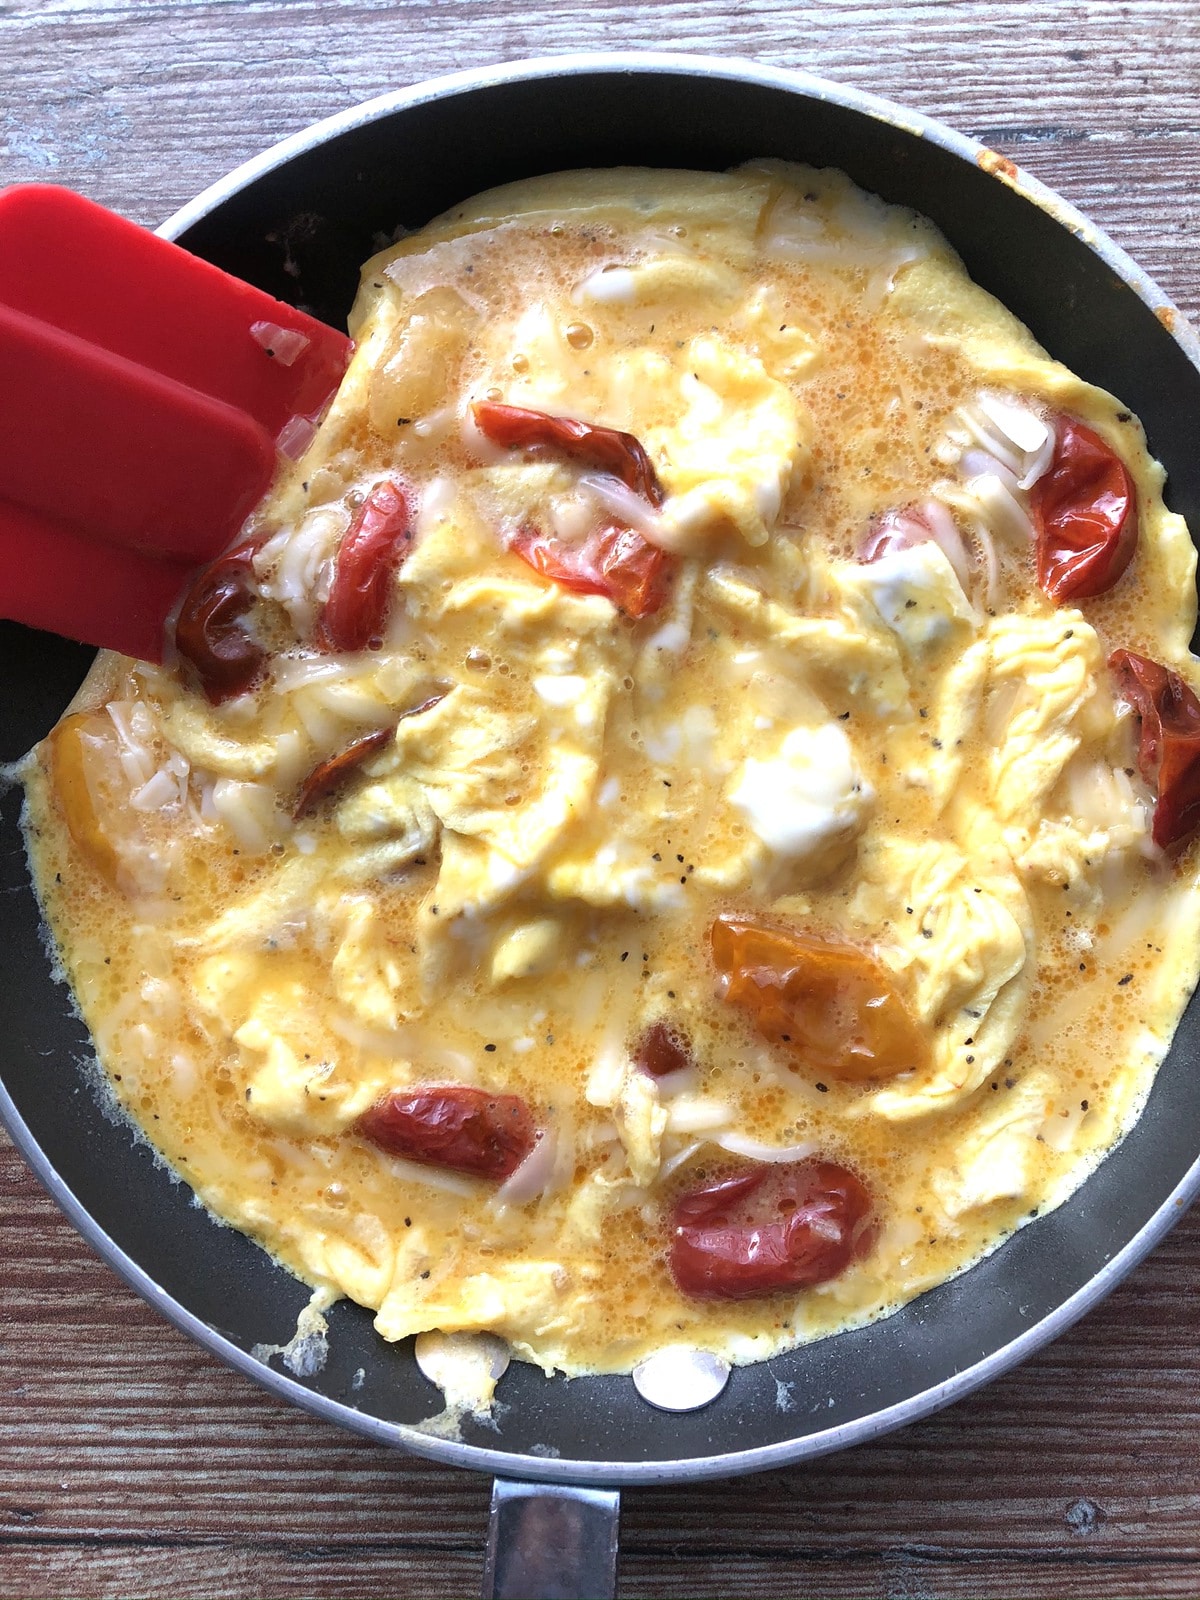 Cooking frittata on stove top